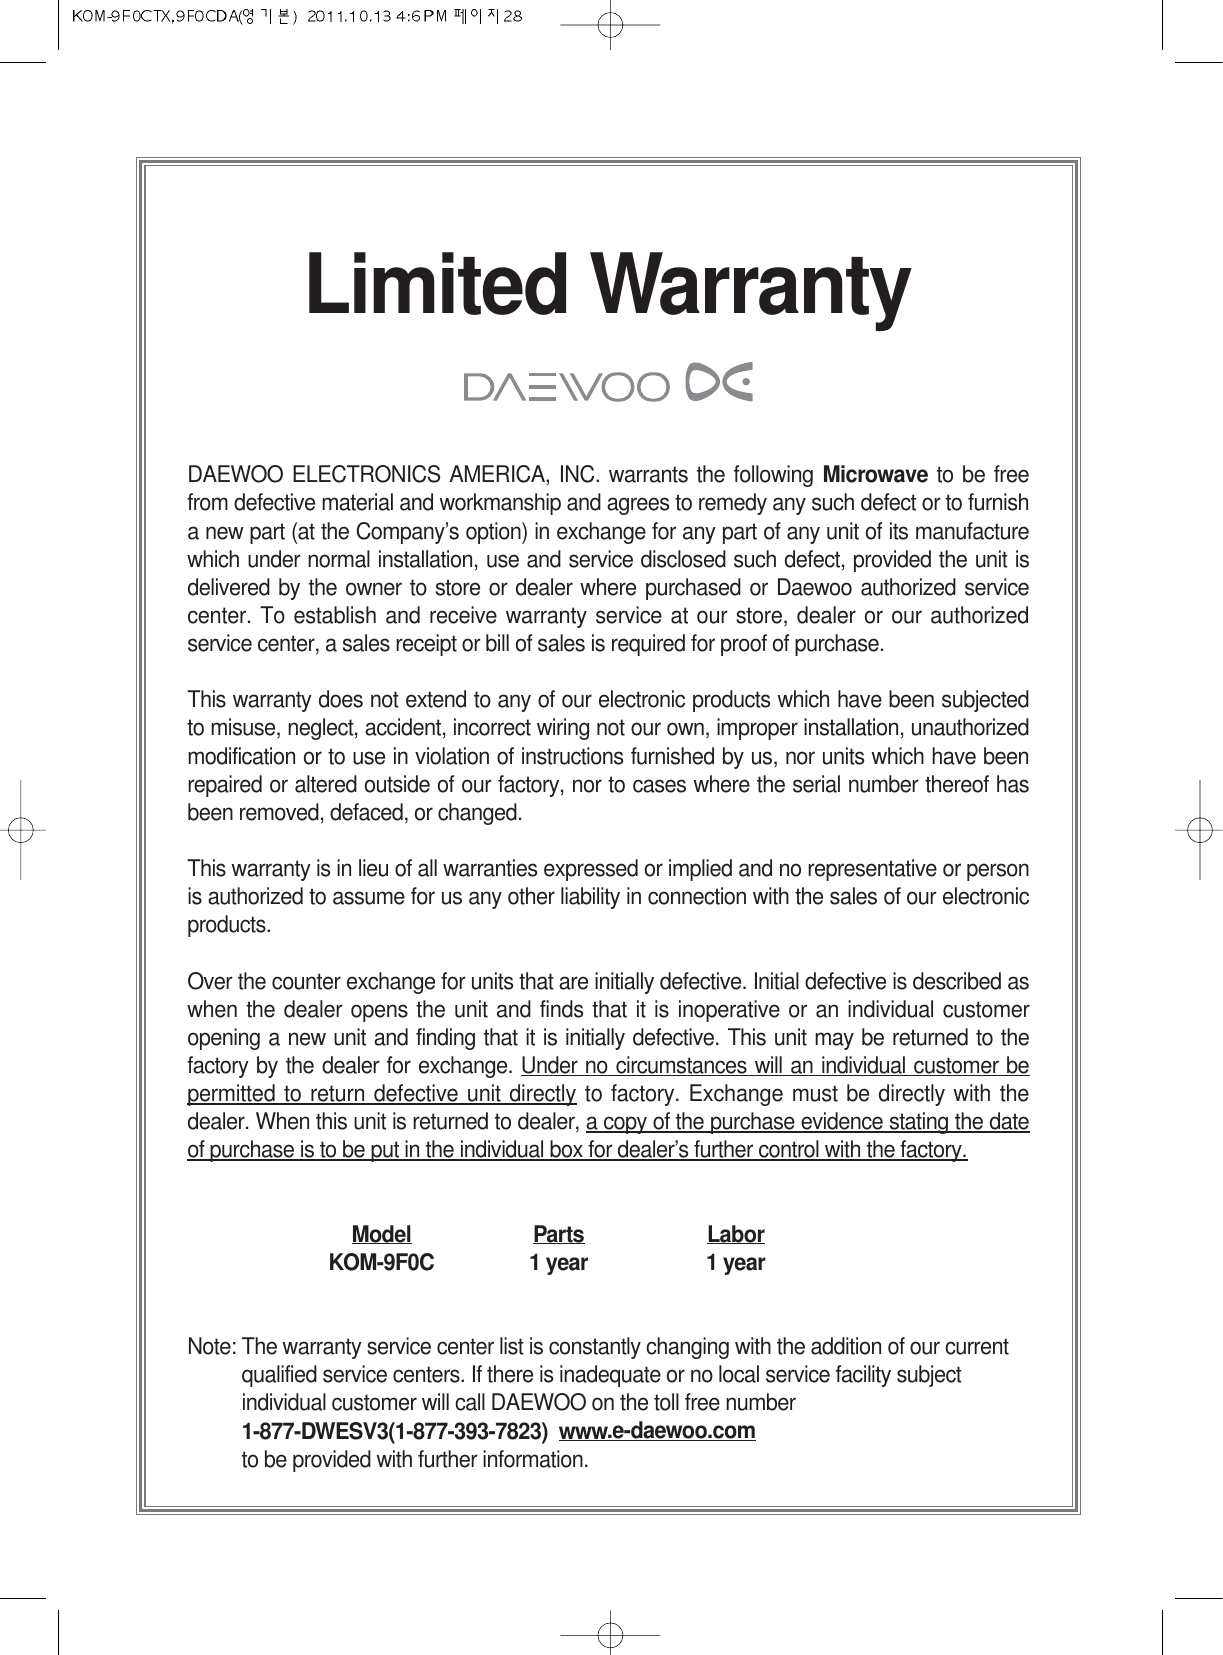 Limited WarrantyDAEWOO ELECTRONICS AMERICA, INC. warrants the following Microwave to be freefrom defective material and workmanship and agrees to remedy any such defect or to furnisha new part (at the Company’s option) in exchange for any part of any unit of its manufacturewhich under normal installation, use and service disclosed such defect, provided the unit isdelivered by the owner to store or dealer where purchased or Daewoo authorized servicecenter. To establish and receive warranty service at our store, dealer or our authorizedservice center, a sales receipt or bill of sales is required for proof of purchase.This warranty does not extend to any of our electronic products which have been subjectedto misuse, neglect, accident, incorrect wiring not our own, improper installation, unauthorizedmodification or to use in violation of instructions furnished by us, nor units which have beenrepaired or altered outside of our factory, nor to cases where the serial number thereof hasbeen removed, defaced, or changed.This warranty is in lieu of all warranties expressed or implied and no representative or personis authorized to assume for us any other liability in connection with the sales of our electronicproducts.Over the counter exchange for units that are initially defective. Initial defective is described aswhen the dealer opens the unit and finds that it is inoperative or an individual customeropening a new unit and finding that it is initially defective. This unit may be returned to thefactory by the dealer for exchange. Under no circumstances will an individual customer bepermitted to return defective unit directly to factory. Exchange must be directly with thedealer. When this unit is returned to dealer, a copy of the purchase evidence stating the dateof purchase is to be put in the individual box for dealer’s further control with the factory.Model Parts LaborKOM-9F0C 1 year 1 yearNote: The warranty service center list is constantly changing with the addition of our currentqualified service centers. If there is inadequate or no local service facility subjectindividual customer will call DAEWOO on the toll free number1-877-DWESV3(1-877-393-7823)  www.e-daewoo.comto be provided with further information.